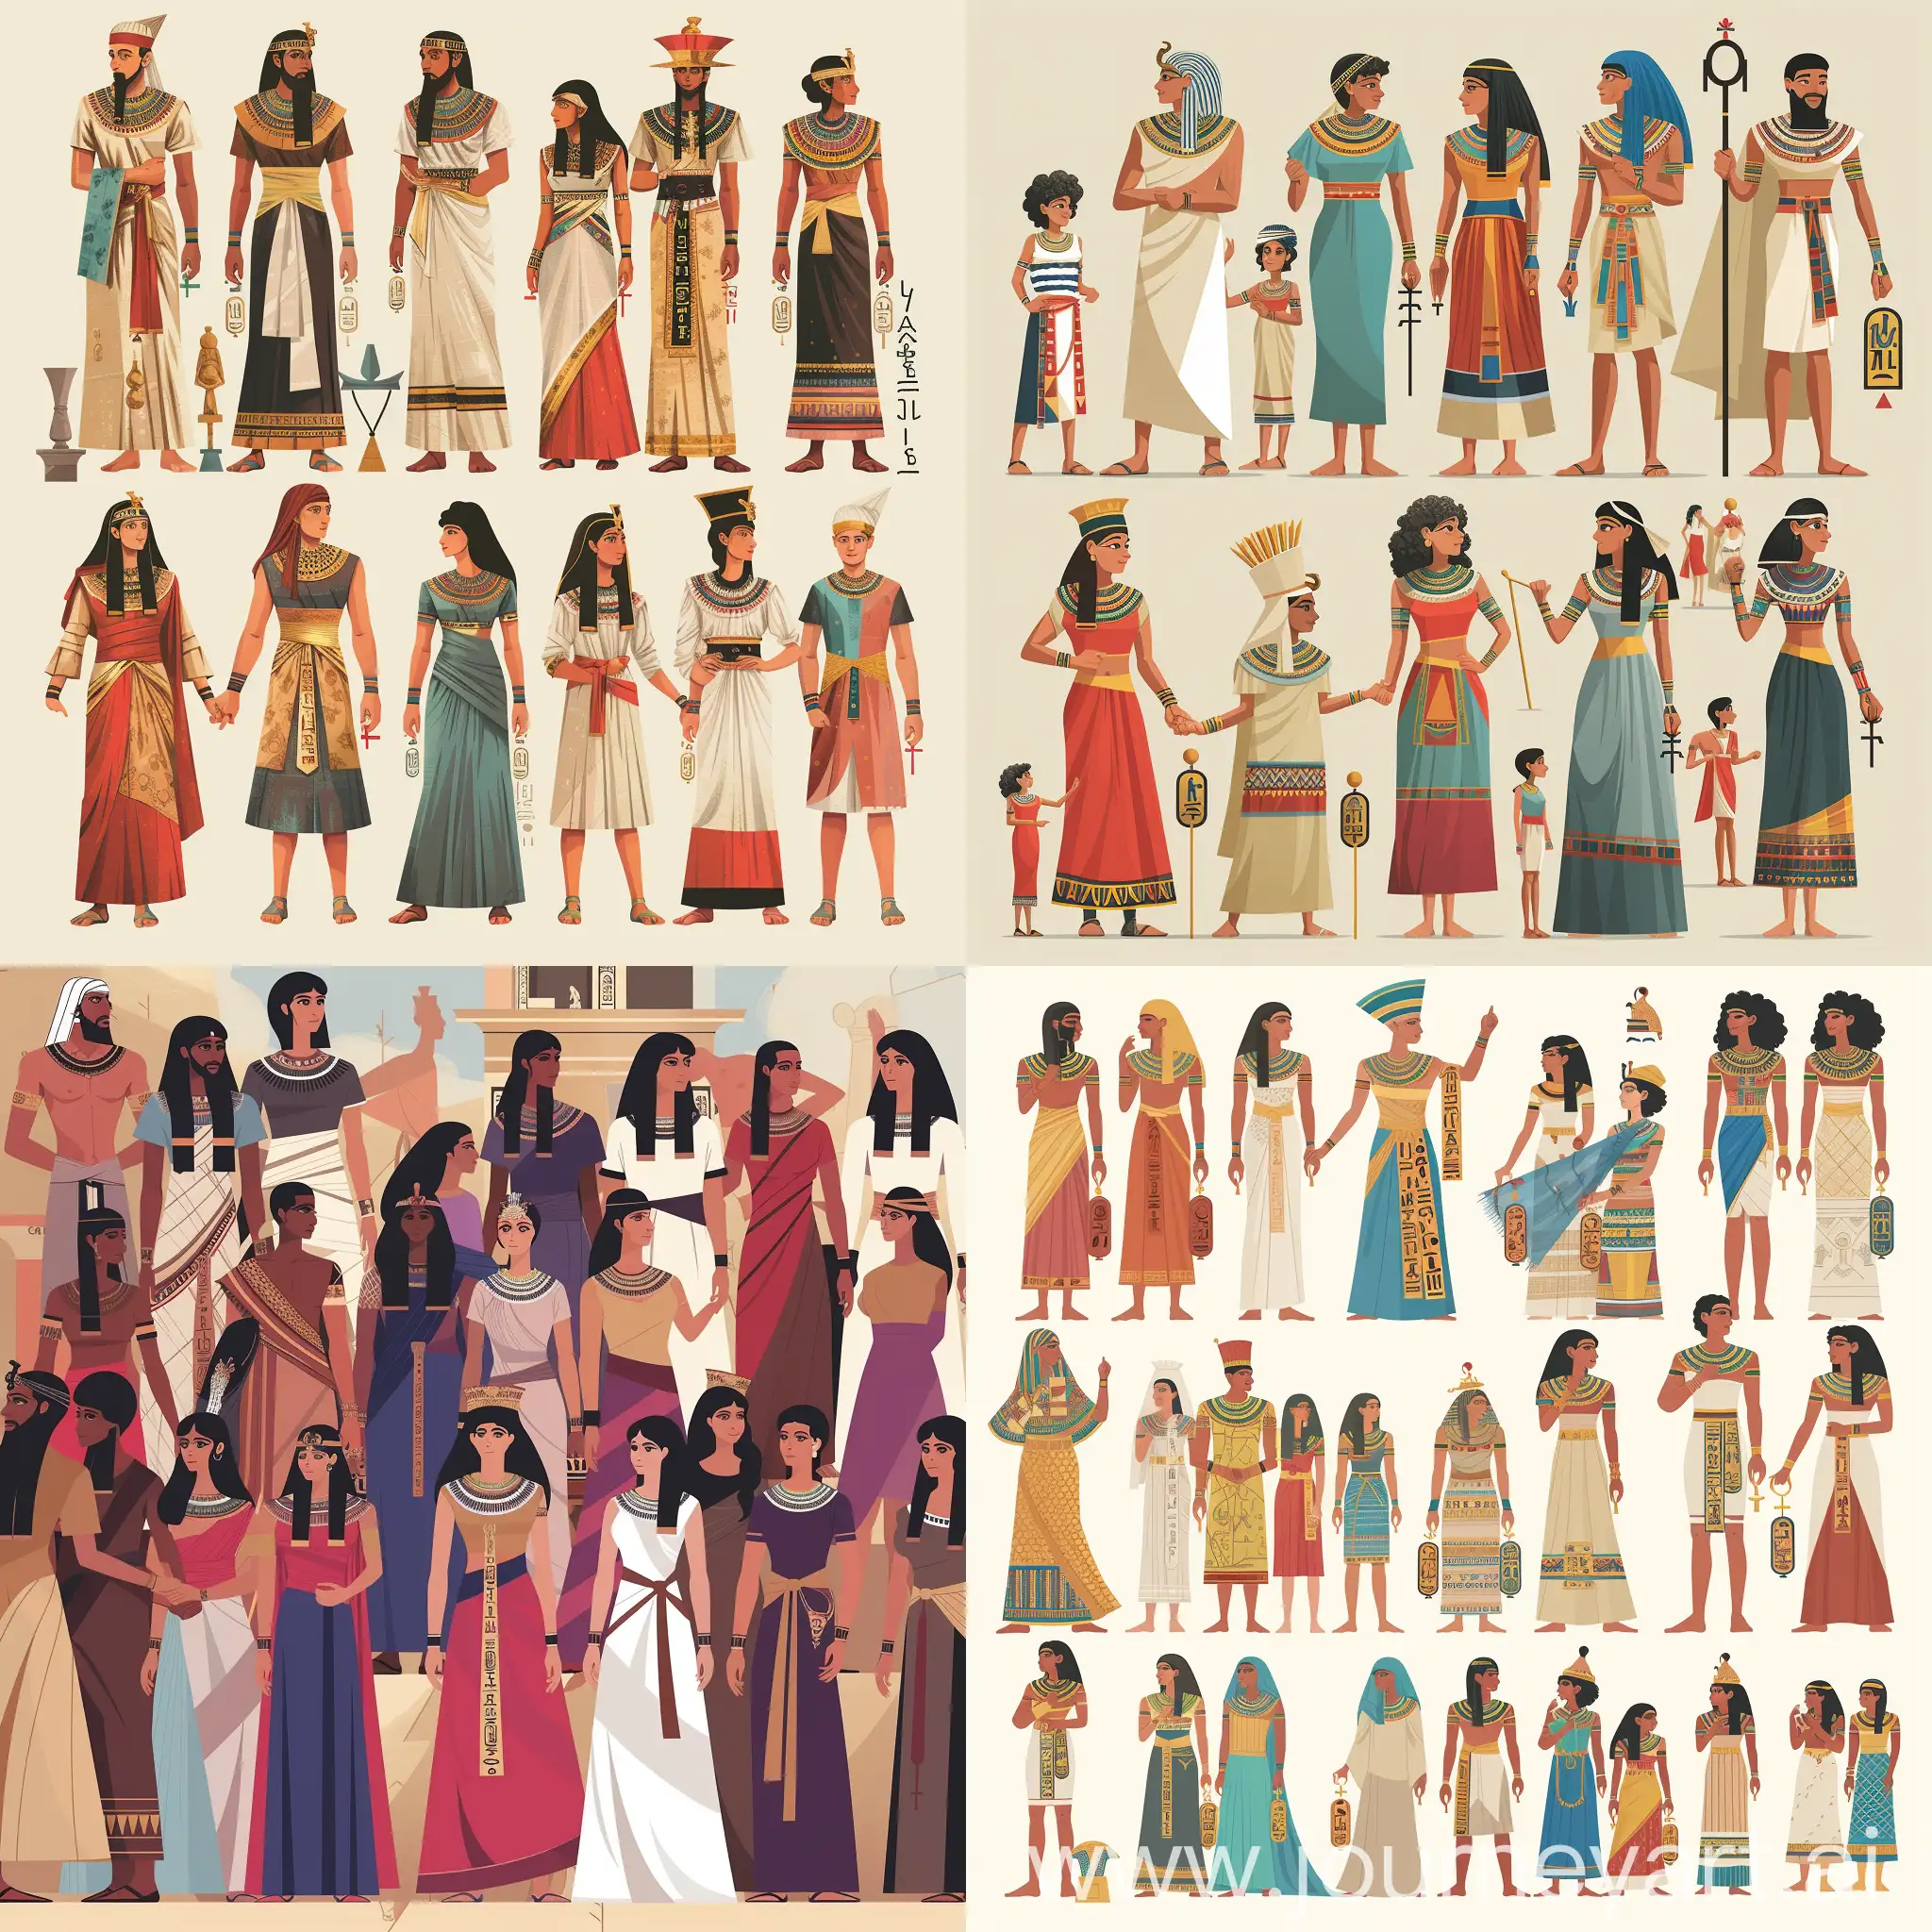 Closing scene with a diverse group of people dressed in different Egyptian costumes, celebrating the country's cultural heritage.
Text: "Unity in Diversity: Celebrating Egypt's Cultural Tapestry"
Description: Emphasizing the richness and diversity of Egyptian culture, as reflected in its clothing traditions throughout history.
At the end of the storyboard, there could be a gift shop offering replicas of Egyptian garments, jewelry, and accessories, as well as books and educational materials on Egyptian fashion and culture. Additionally, a multimedia section could include videos showcasing traditional clothing rituals, interviews with Egyptian designers, and fashion shows highlighting contemporary Egyptian fashion trends.